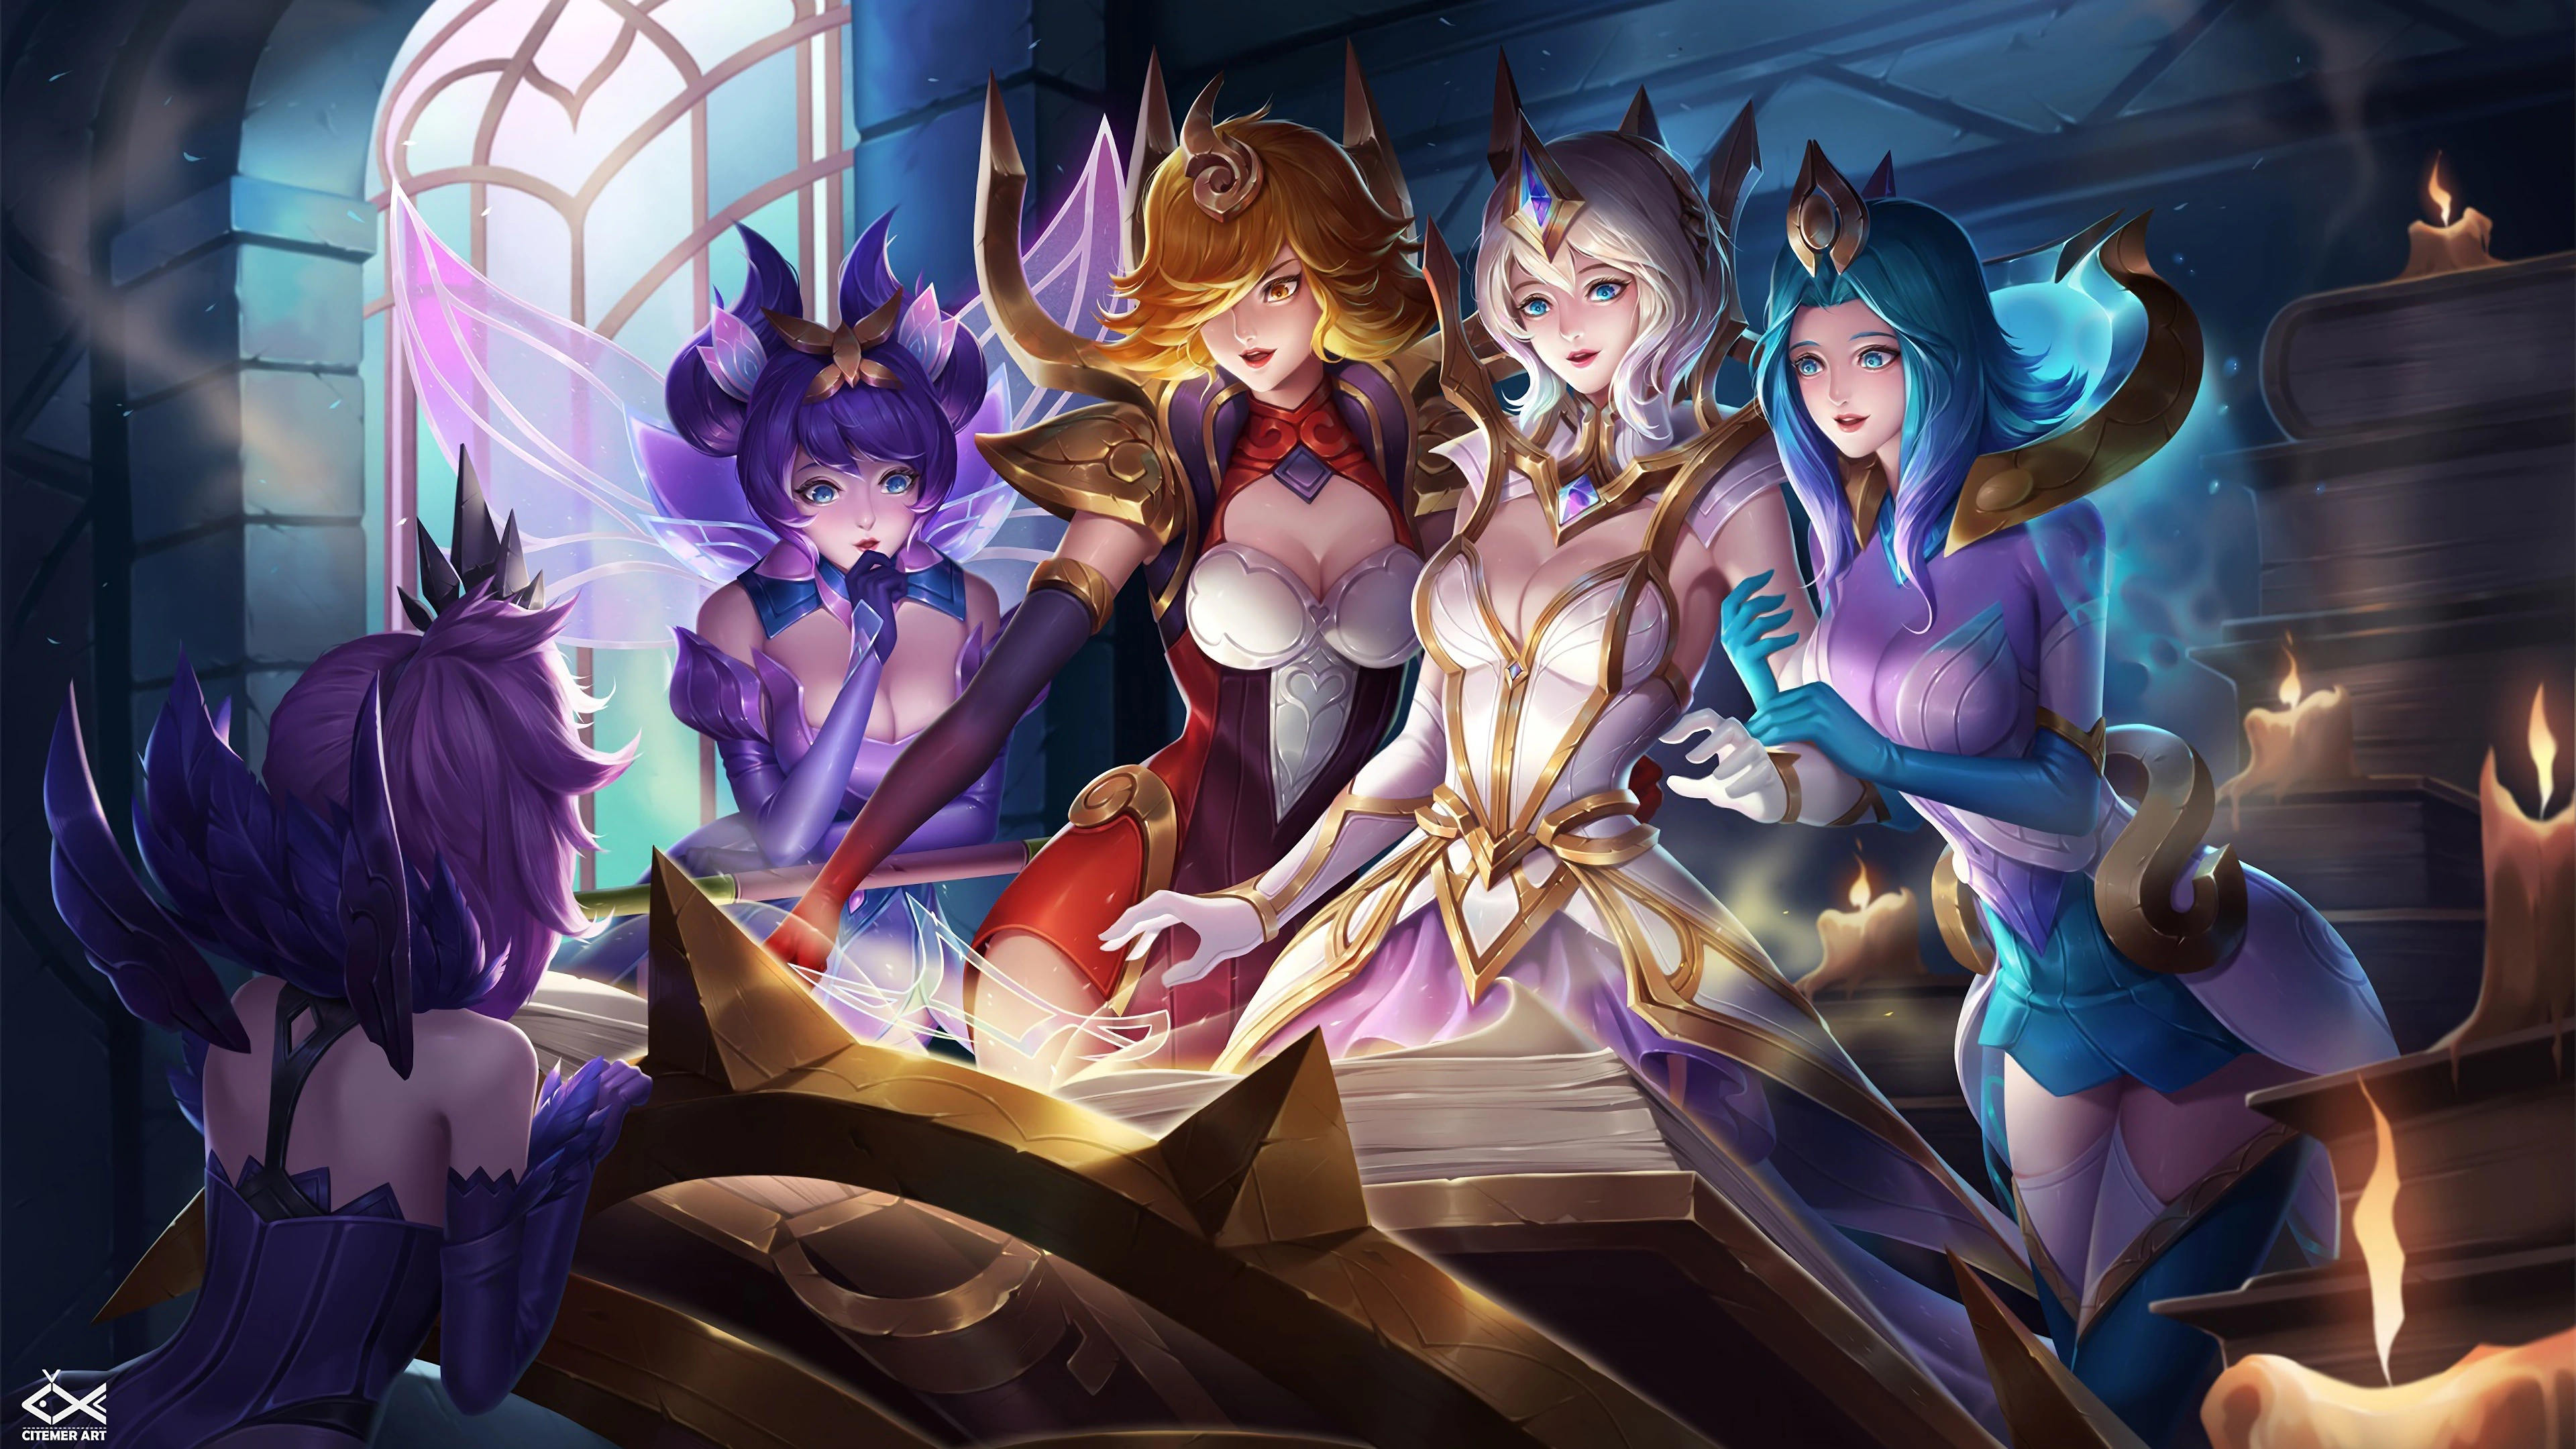 LUX ANIME SKIN GAMEPLAY - Battle Academia LUX - LEAGUE OF LEGENDS - YouTube